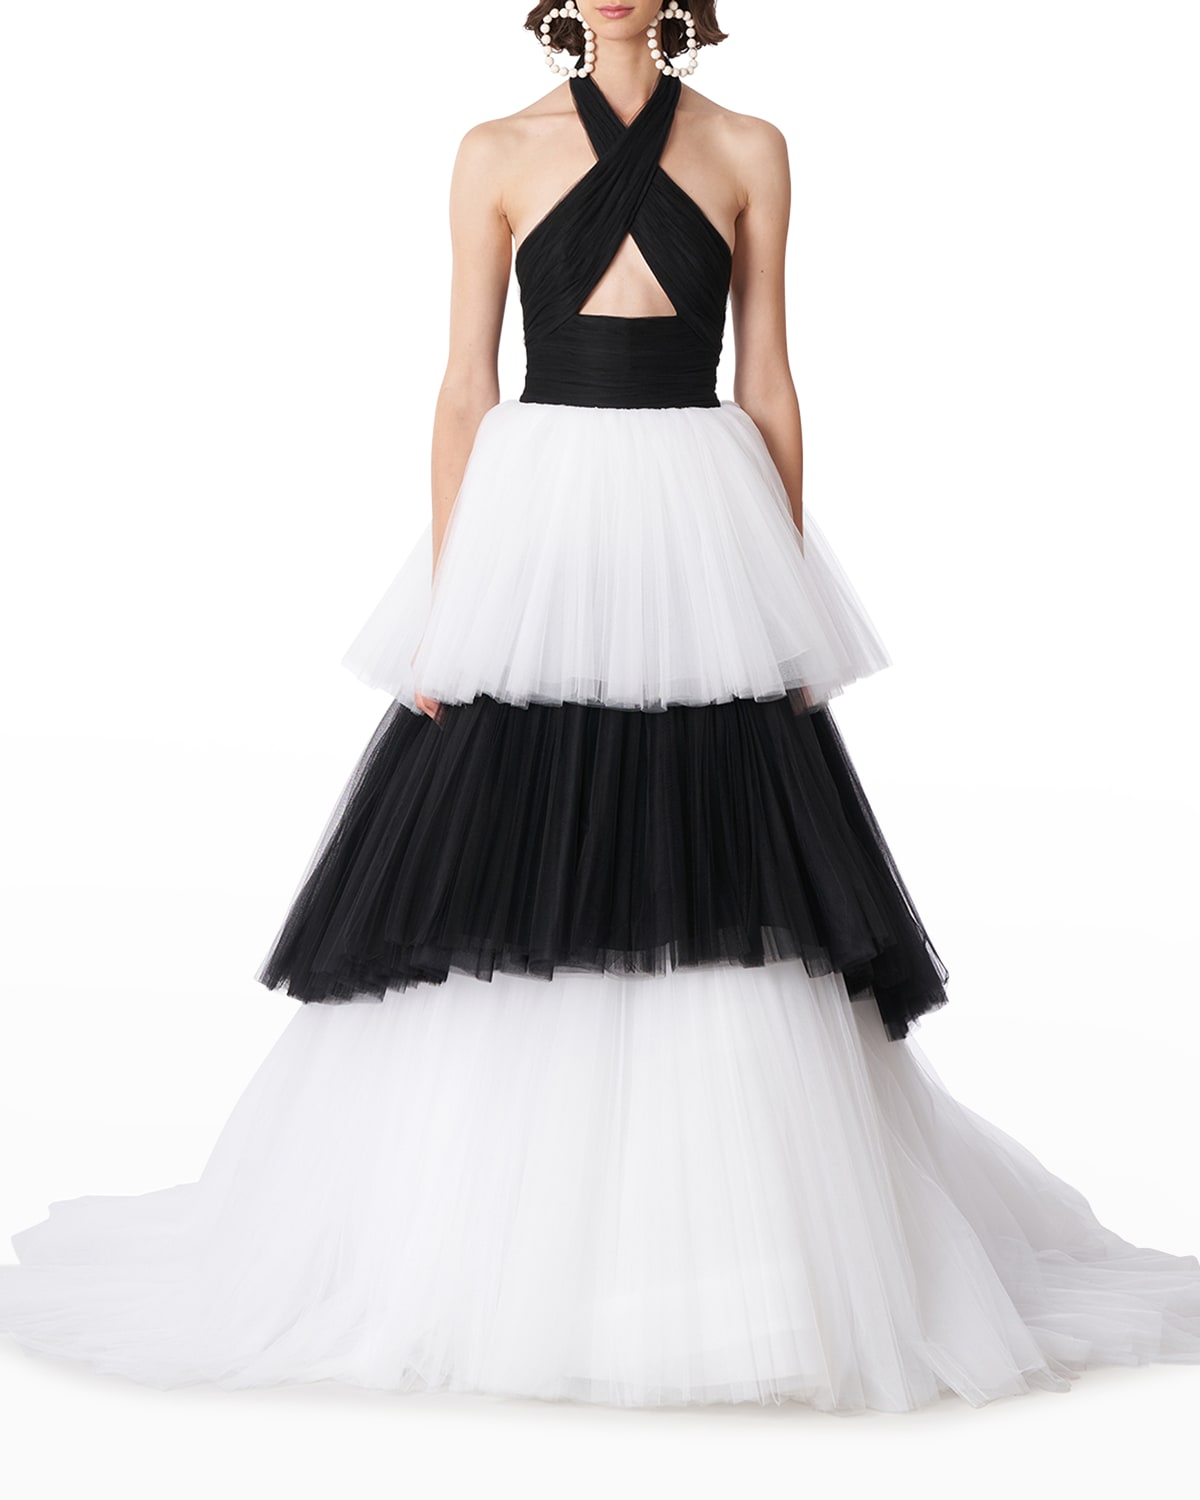 Crisscross Halter Bicolor Tiered Tulle Gown